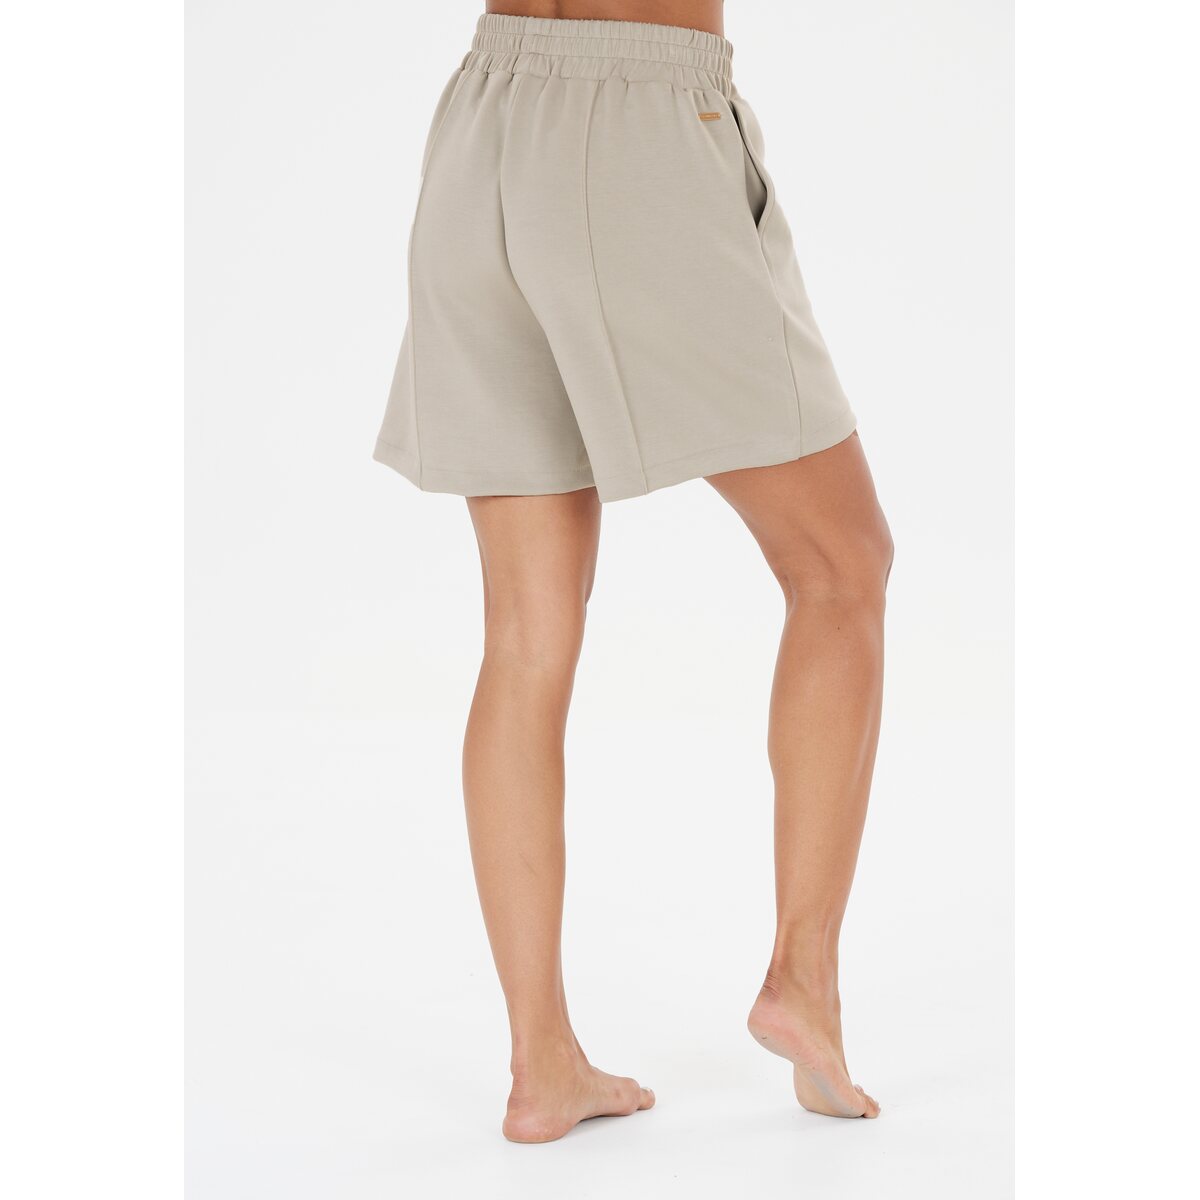 Athlecia Jacey Womenswear High Waisted Lounge Shorts 2 Shaws Department Stores